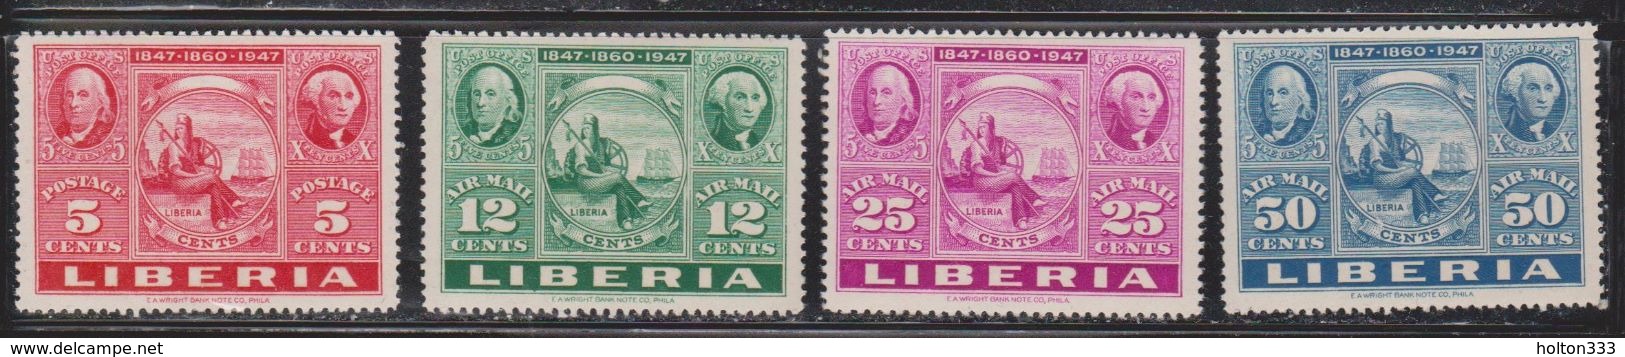 LIBERIA Scott # 300, C354-6 MNH - US Stamps & Seal Of The Country - Liberia